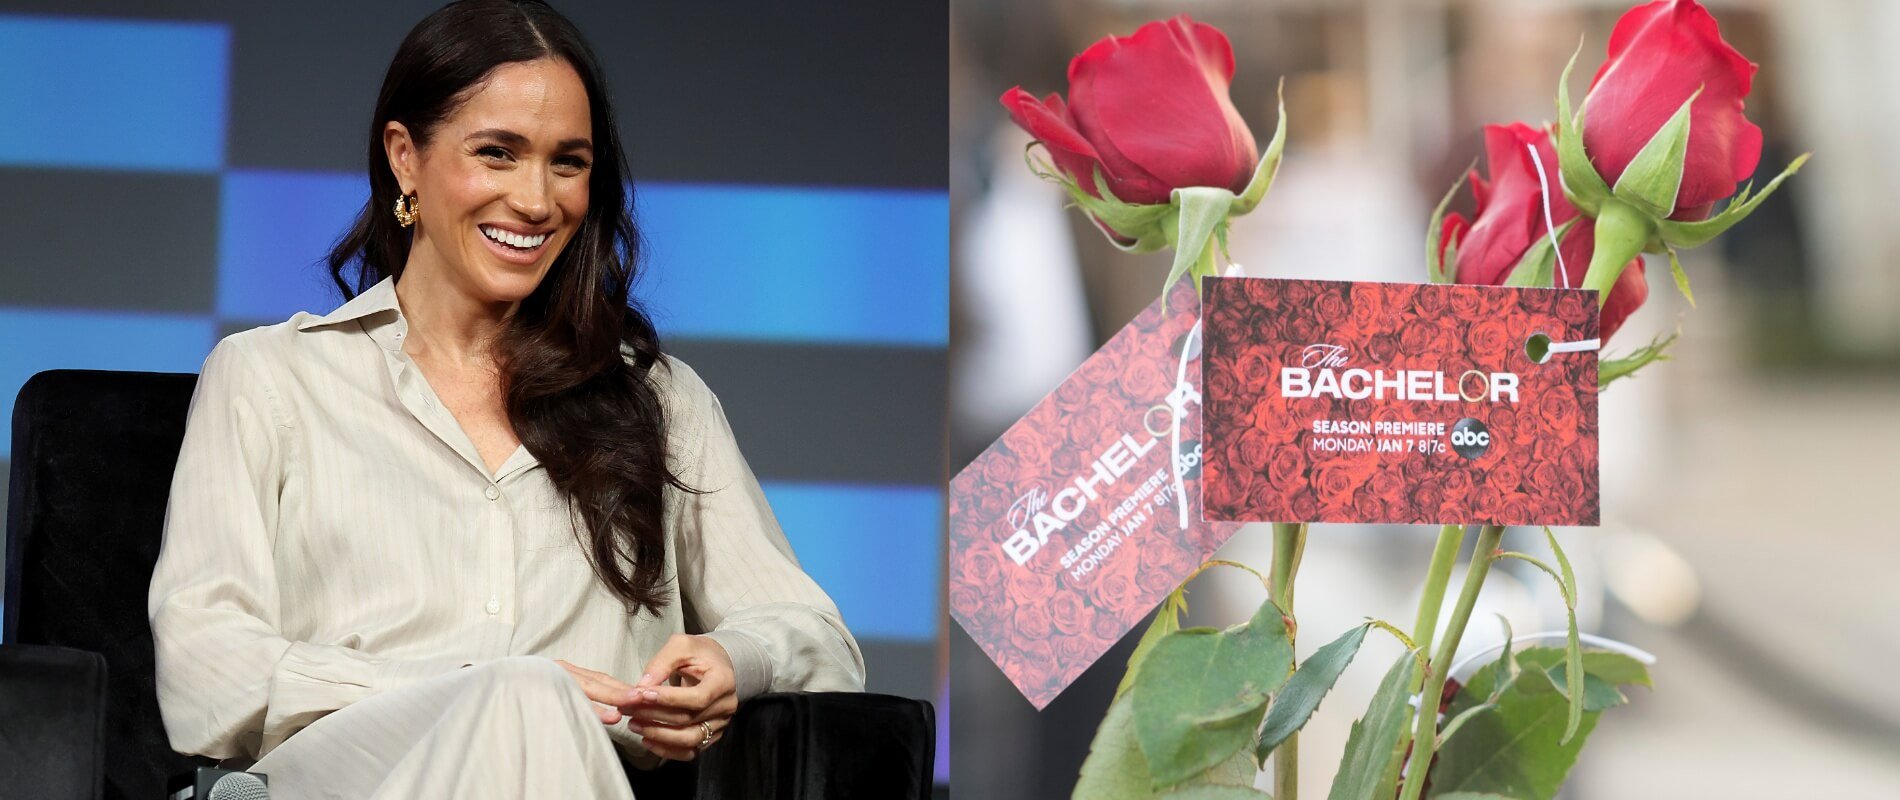 Meghan Markle in a side-by-side image with 'The Bachelor' roses